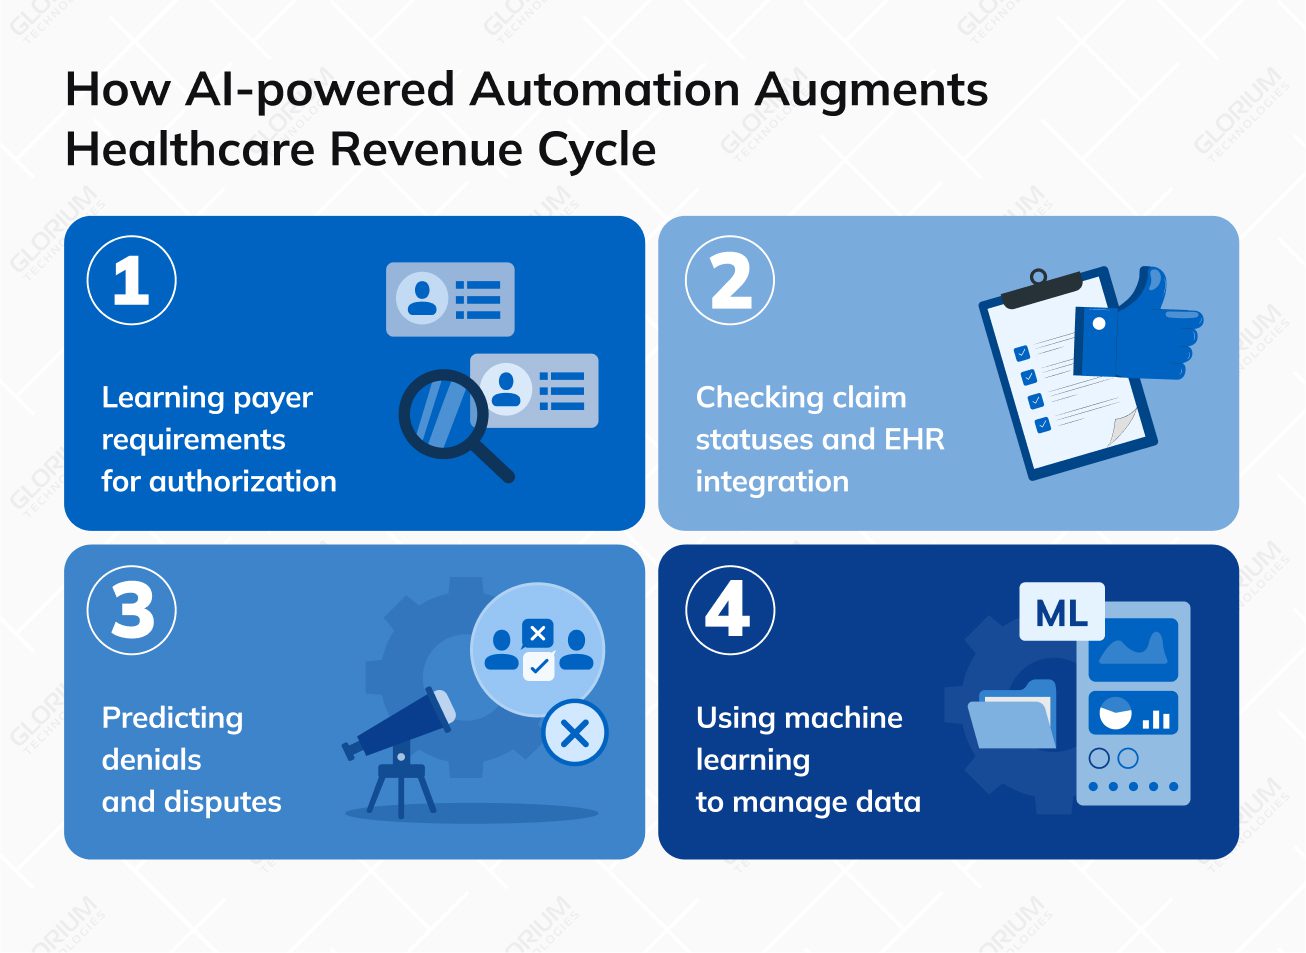 How AI powered Automation Augments Healthcare Revenue Cycle